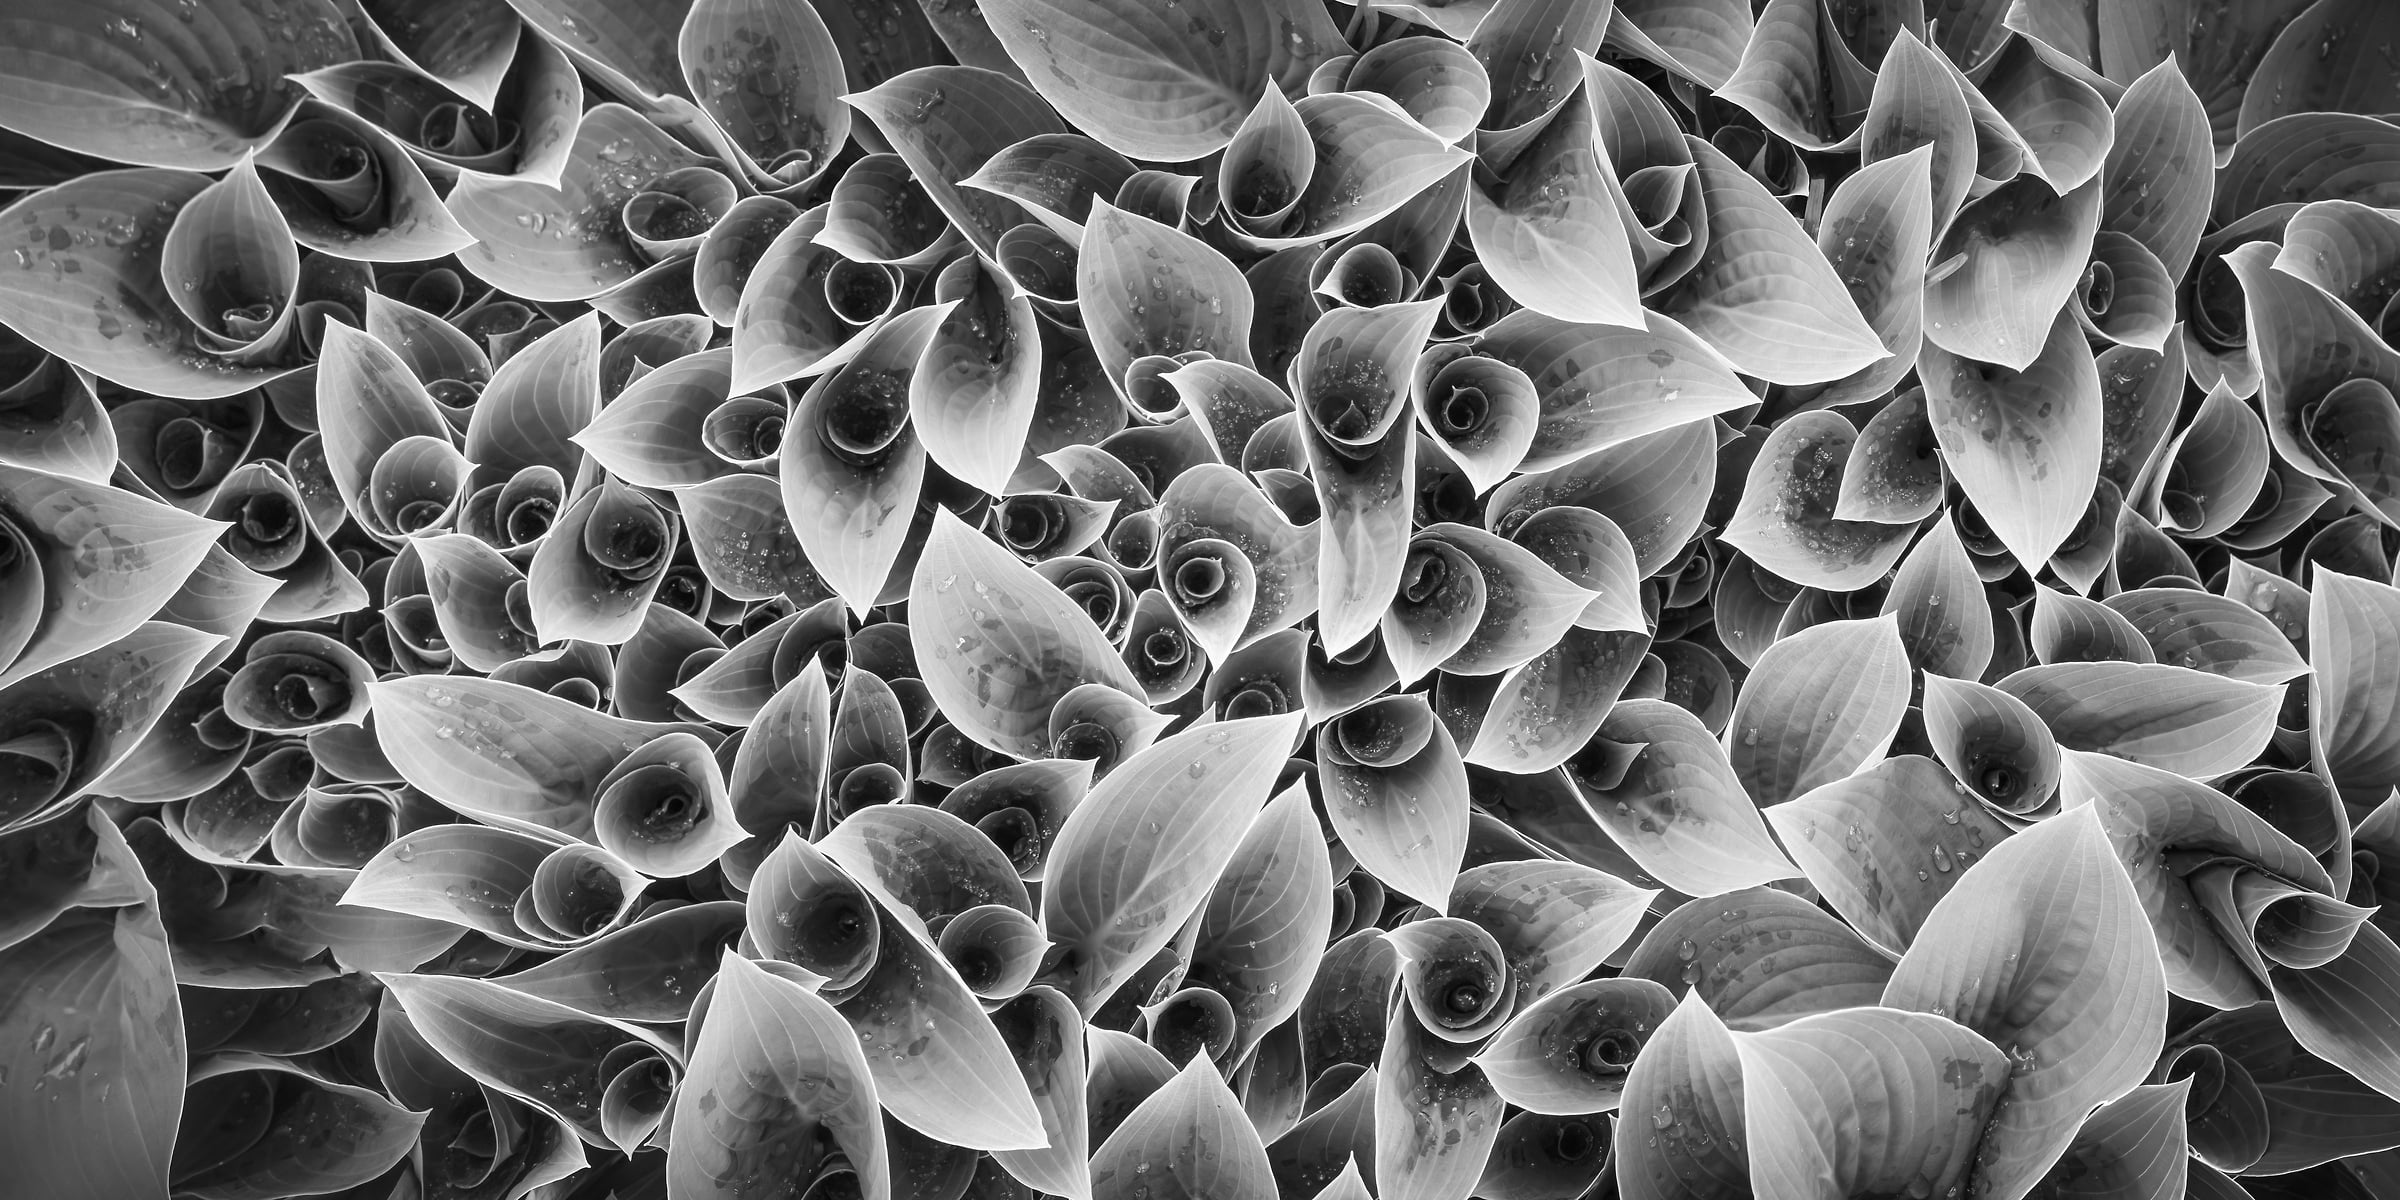 344 megapixels! A very high resolution, large-format VAST photo print of a hosta plant with beautiful curling leaves; black & white photograph created by Dan Piech in New York Botanical Garden, New York City.